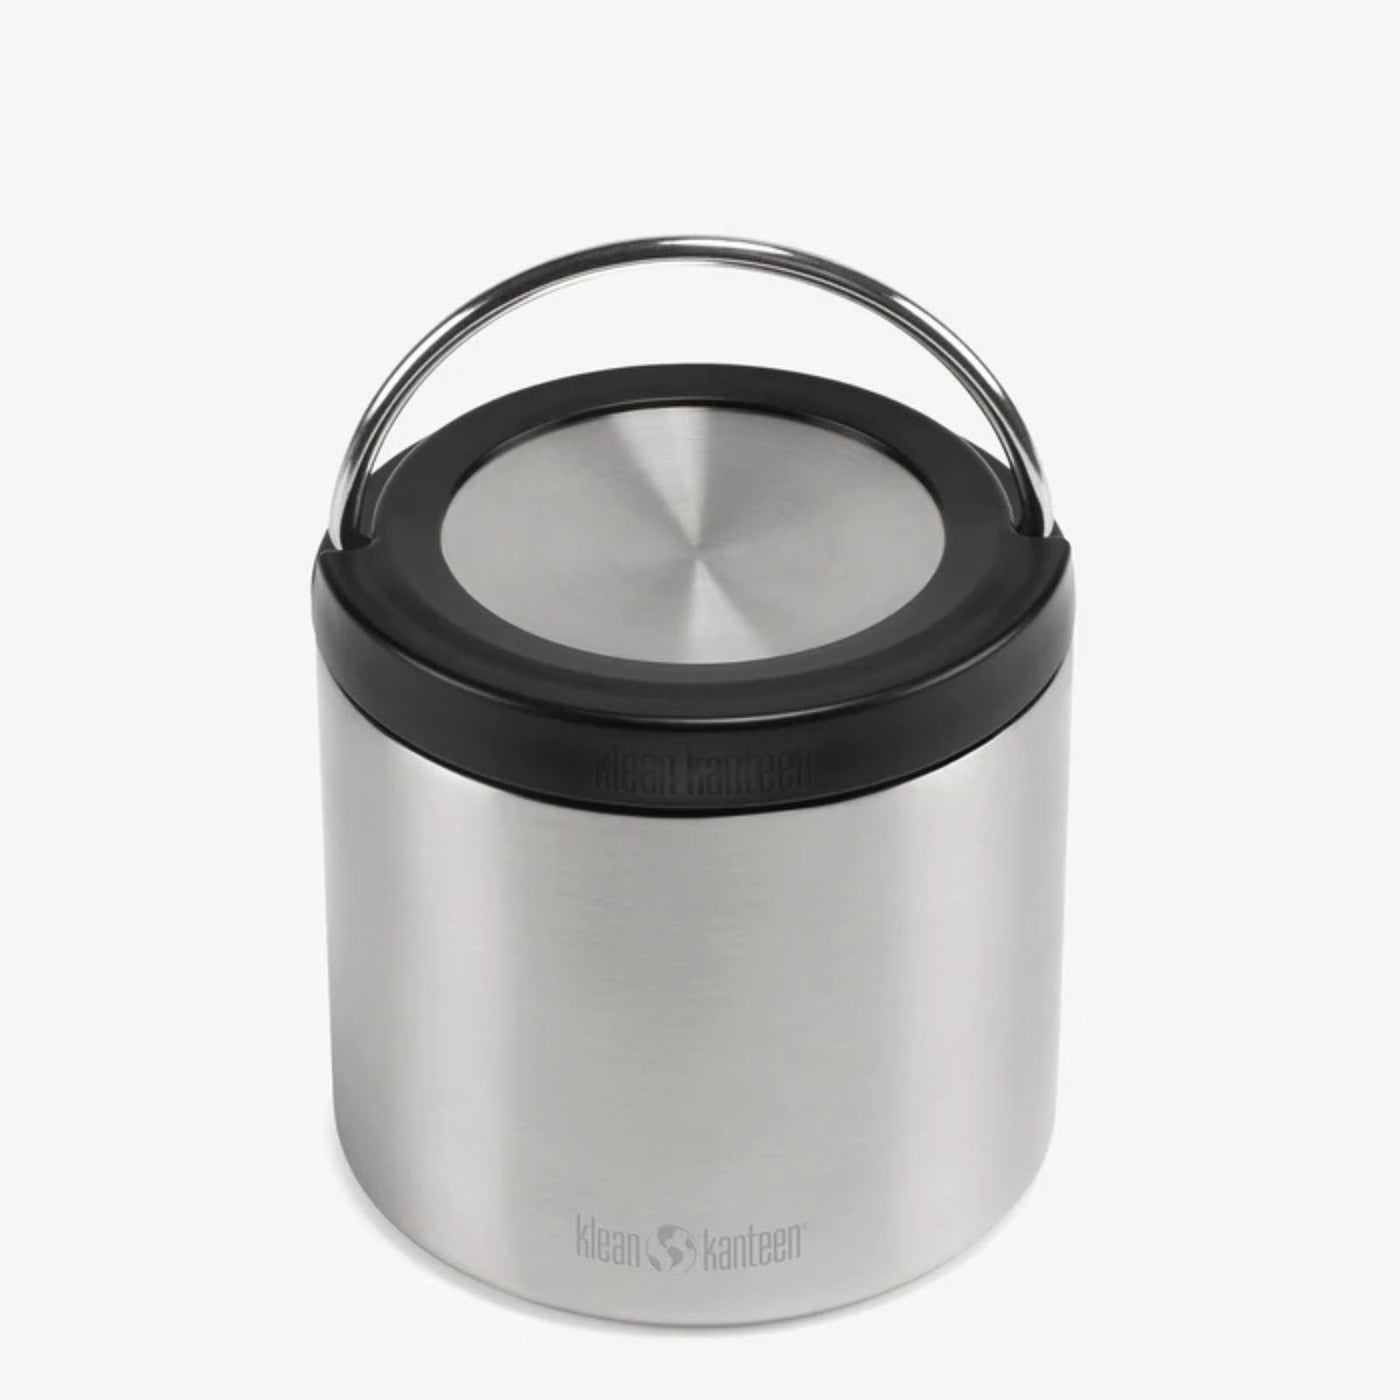 Klean Kanteen Klean Kanteen 16 Oz Vac Food Canister Brushed Stainless Camping And Outdoor